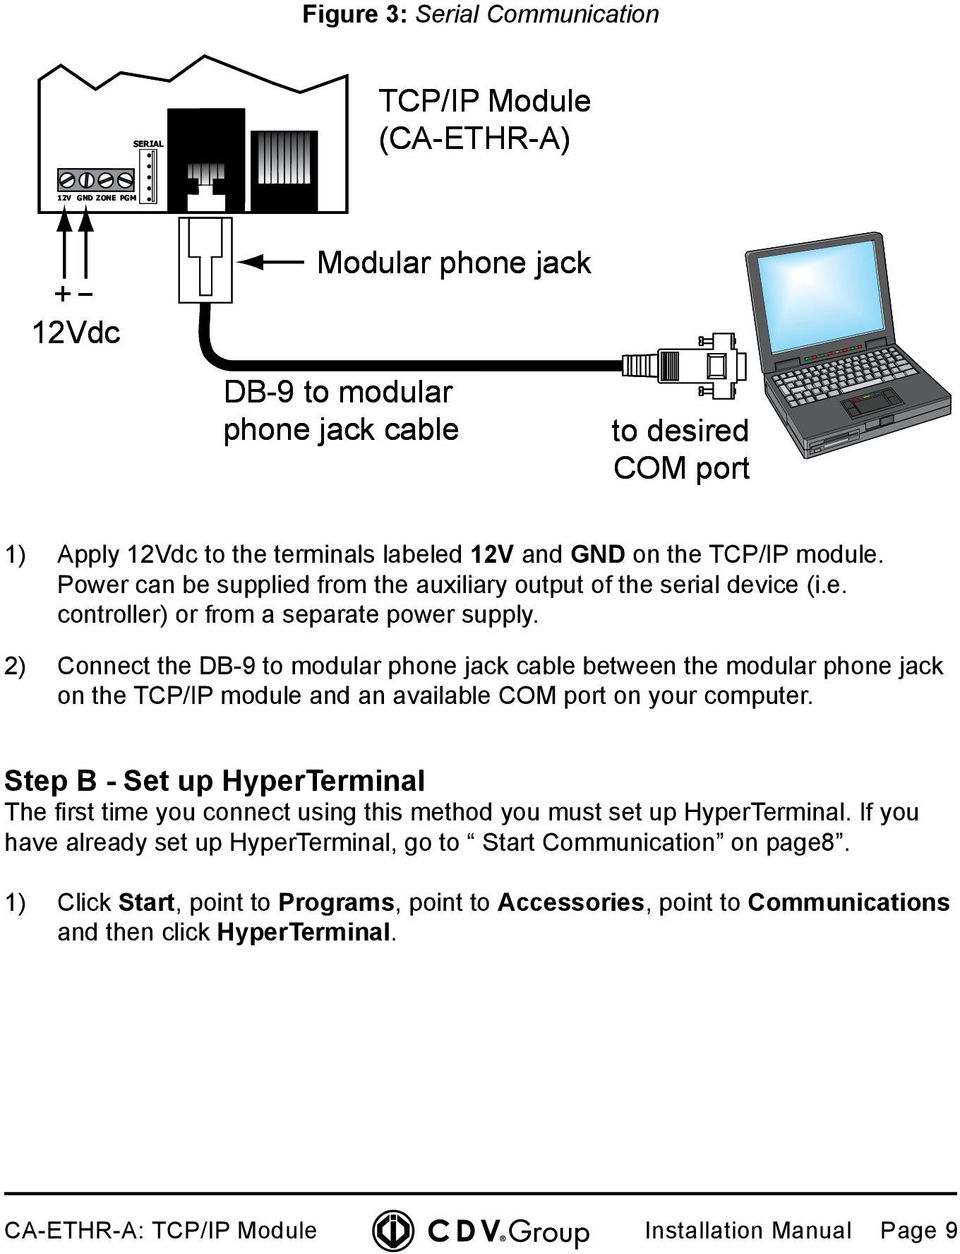 2) Connect the DB-9 to modular phone jack cable between the modular phone jack on the TCP/IP module and an available COM port on your computer.